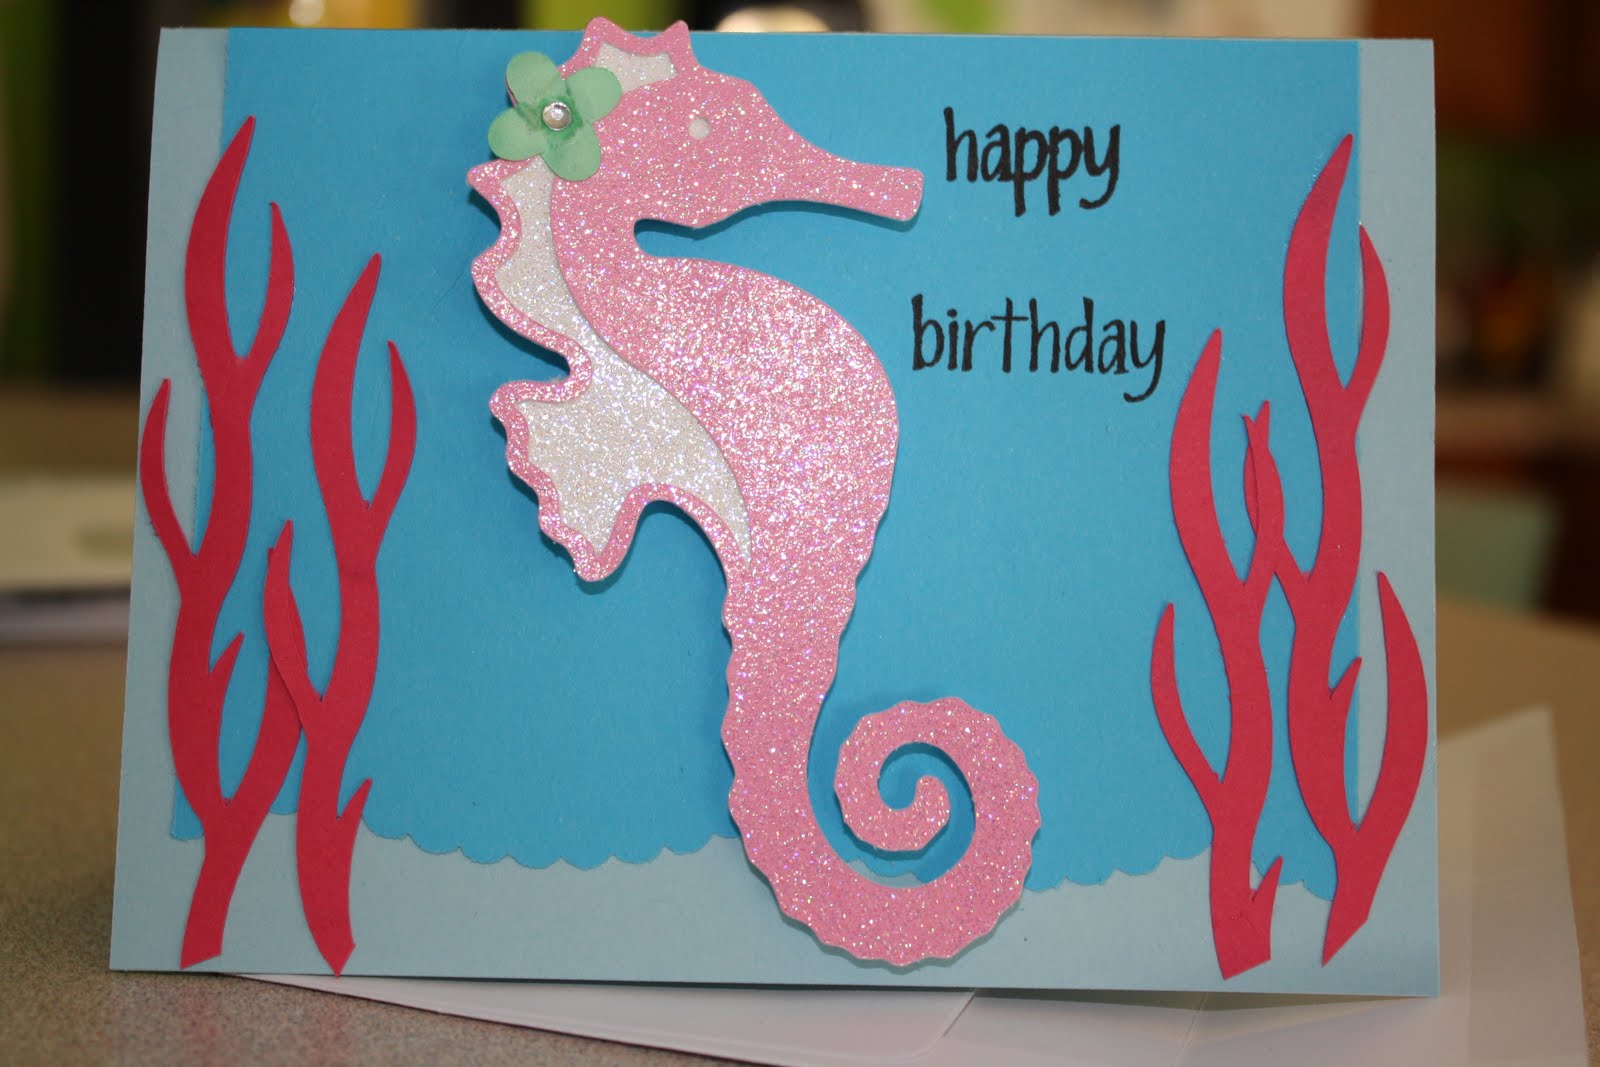 sallie-sweet-sewing-and-cricut-crafts-birthday-card-for-2-year-old